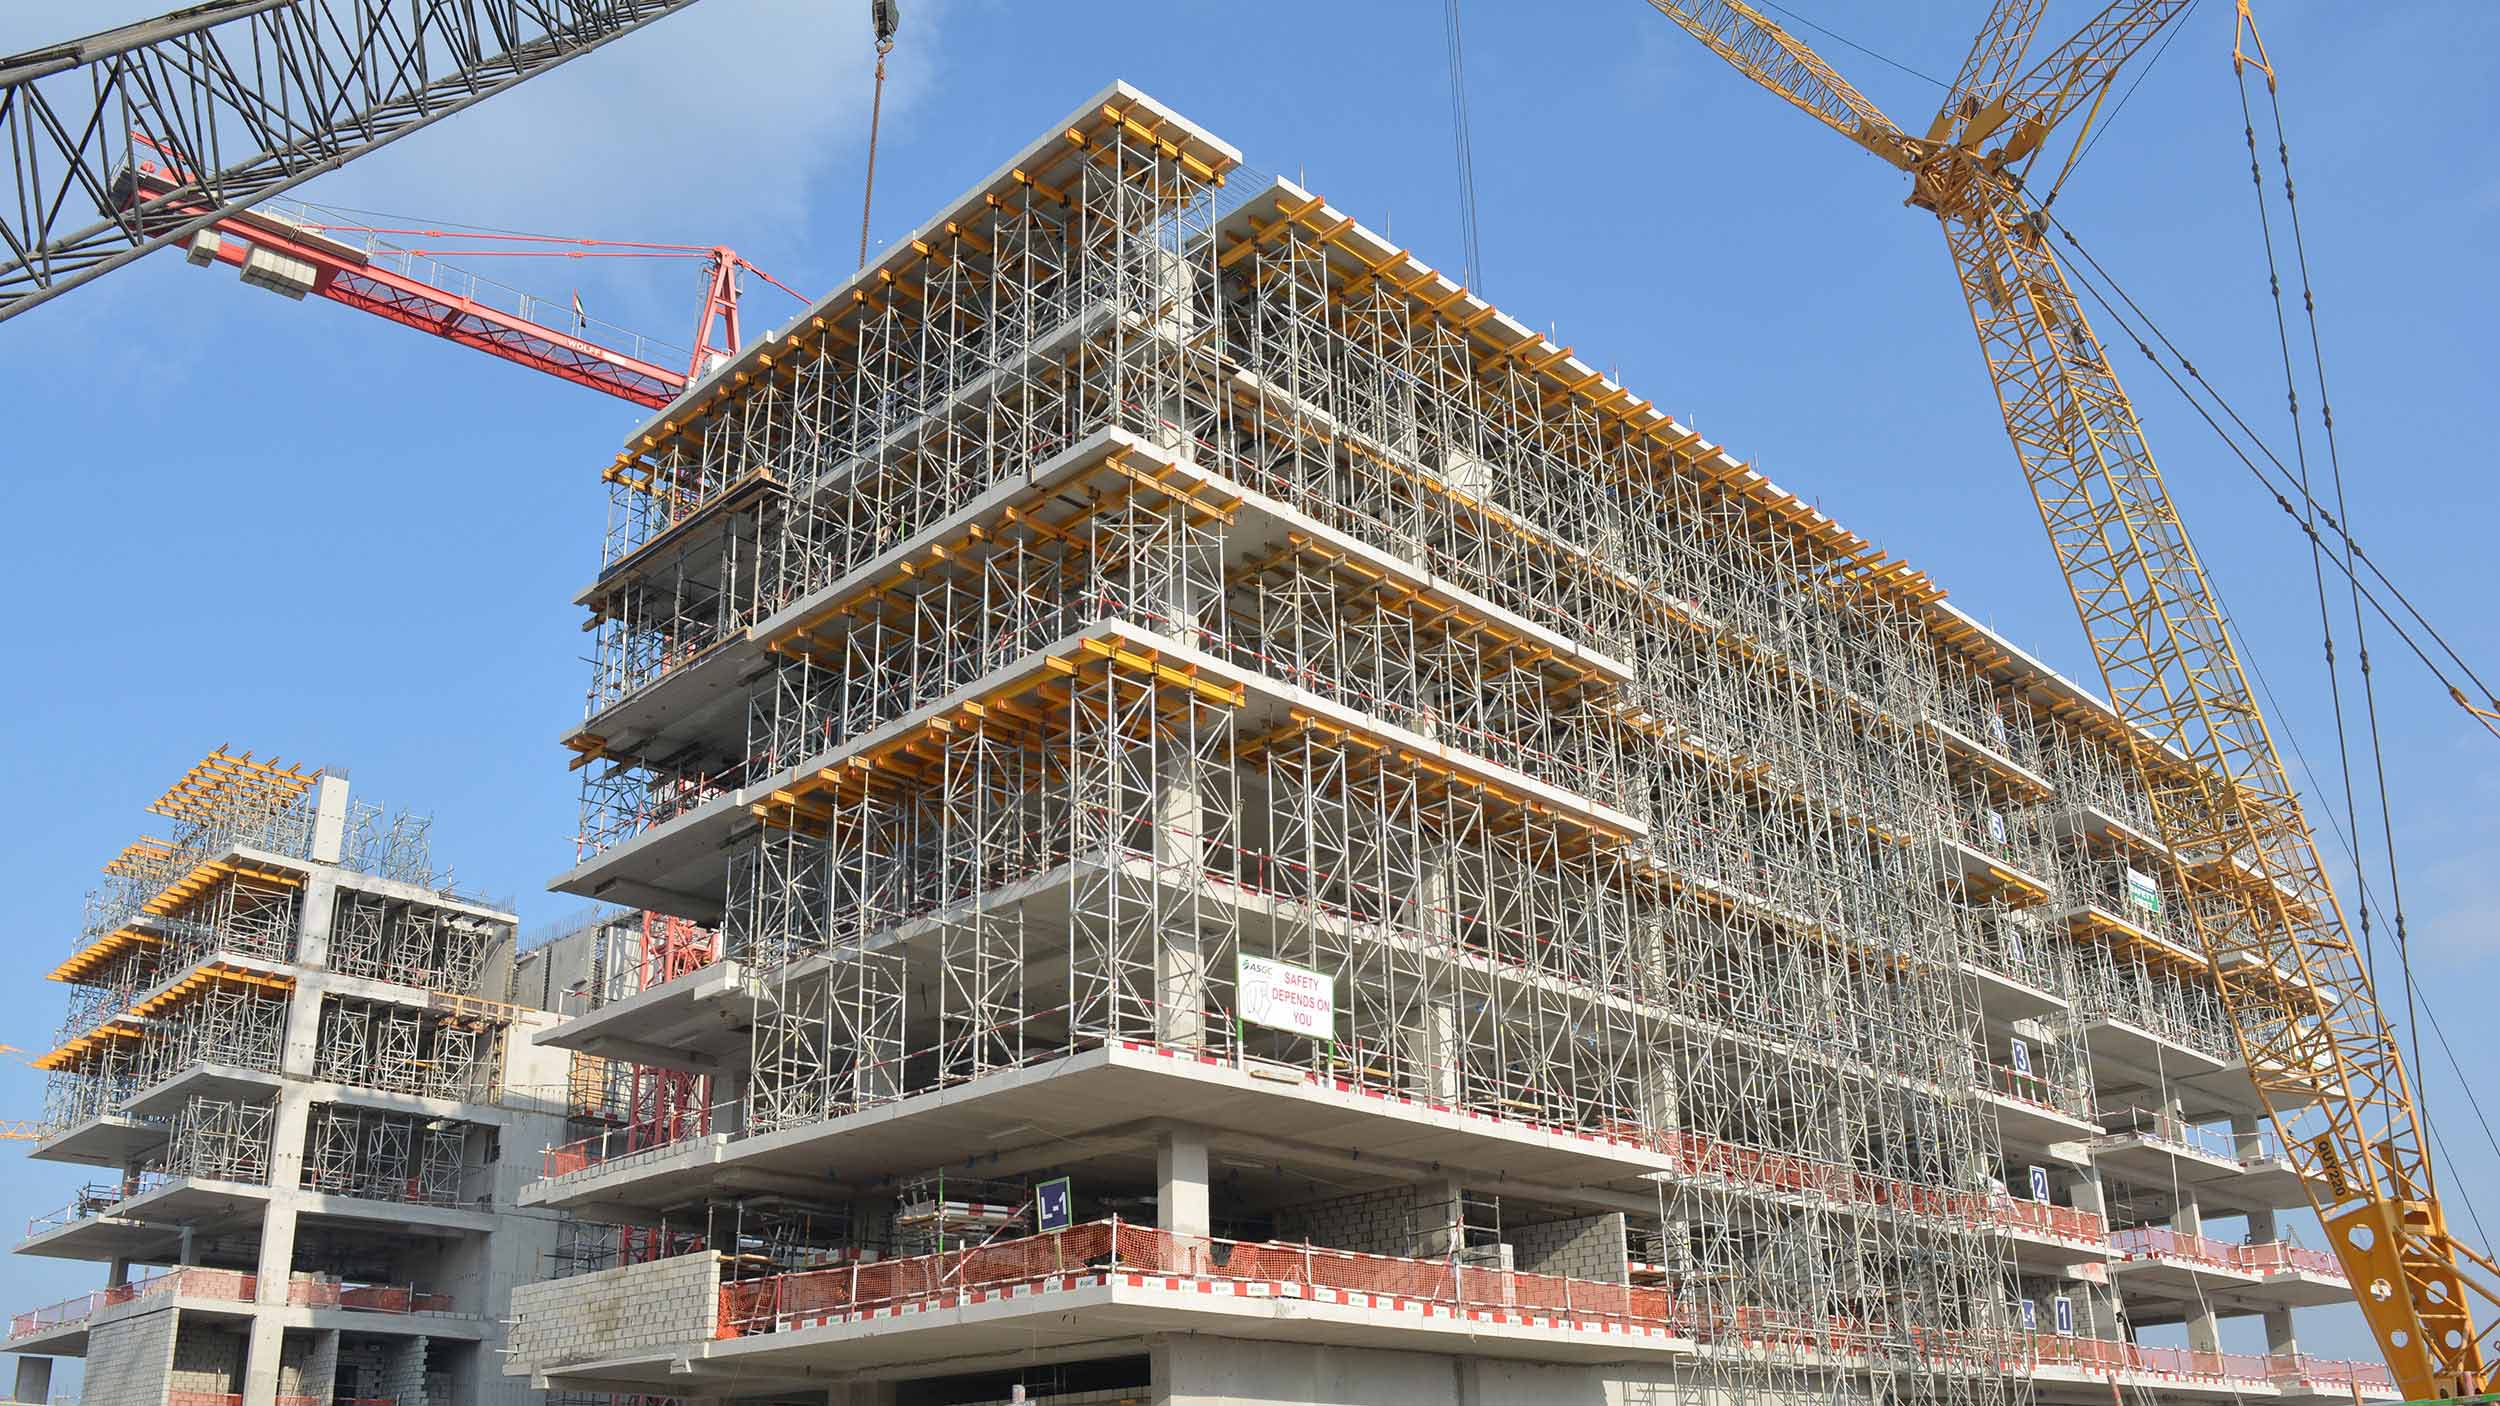 ULMA concrete forms and shoring are designed to provide production efficiency and on-site safety on most any construction project. Specify ULMA for superior concrete forming